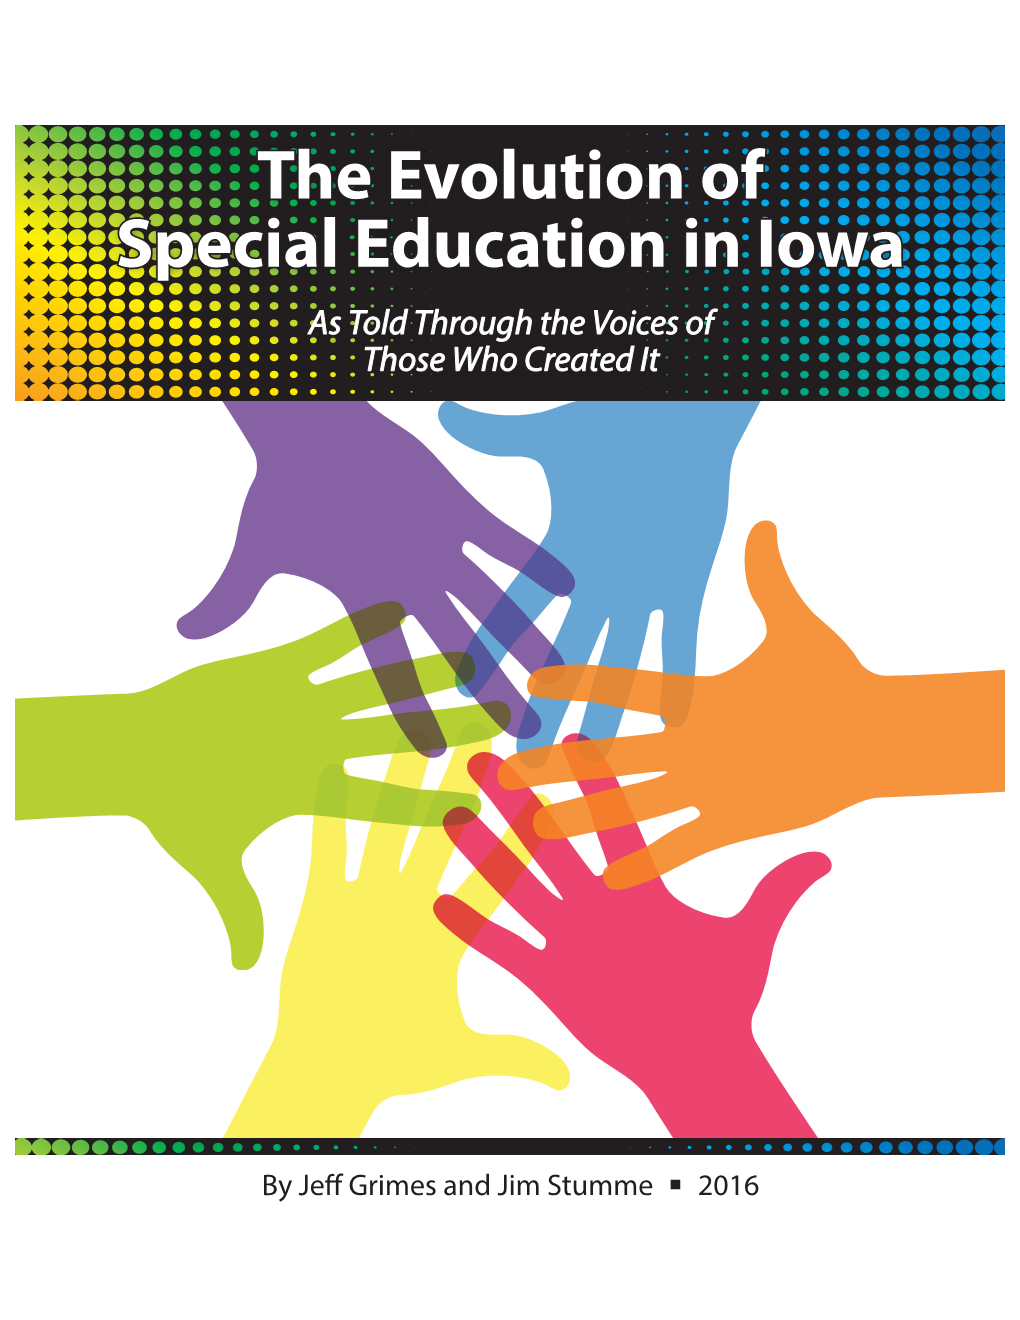 The Evolution of Special Education in Iowa As Told Through the Voices of Those Who Created It